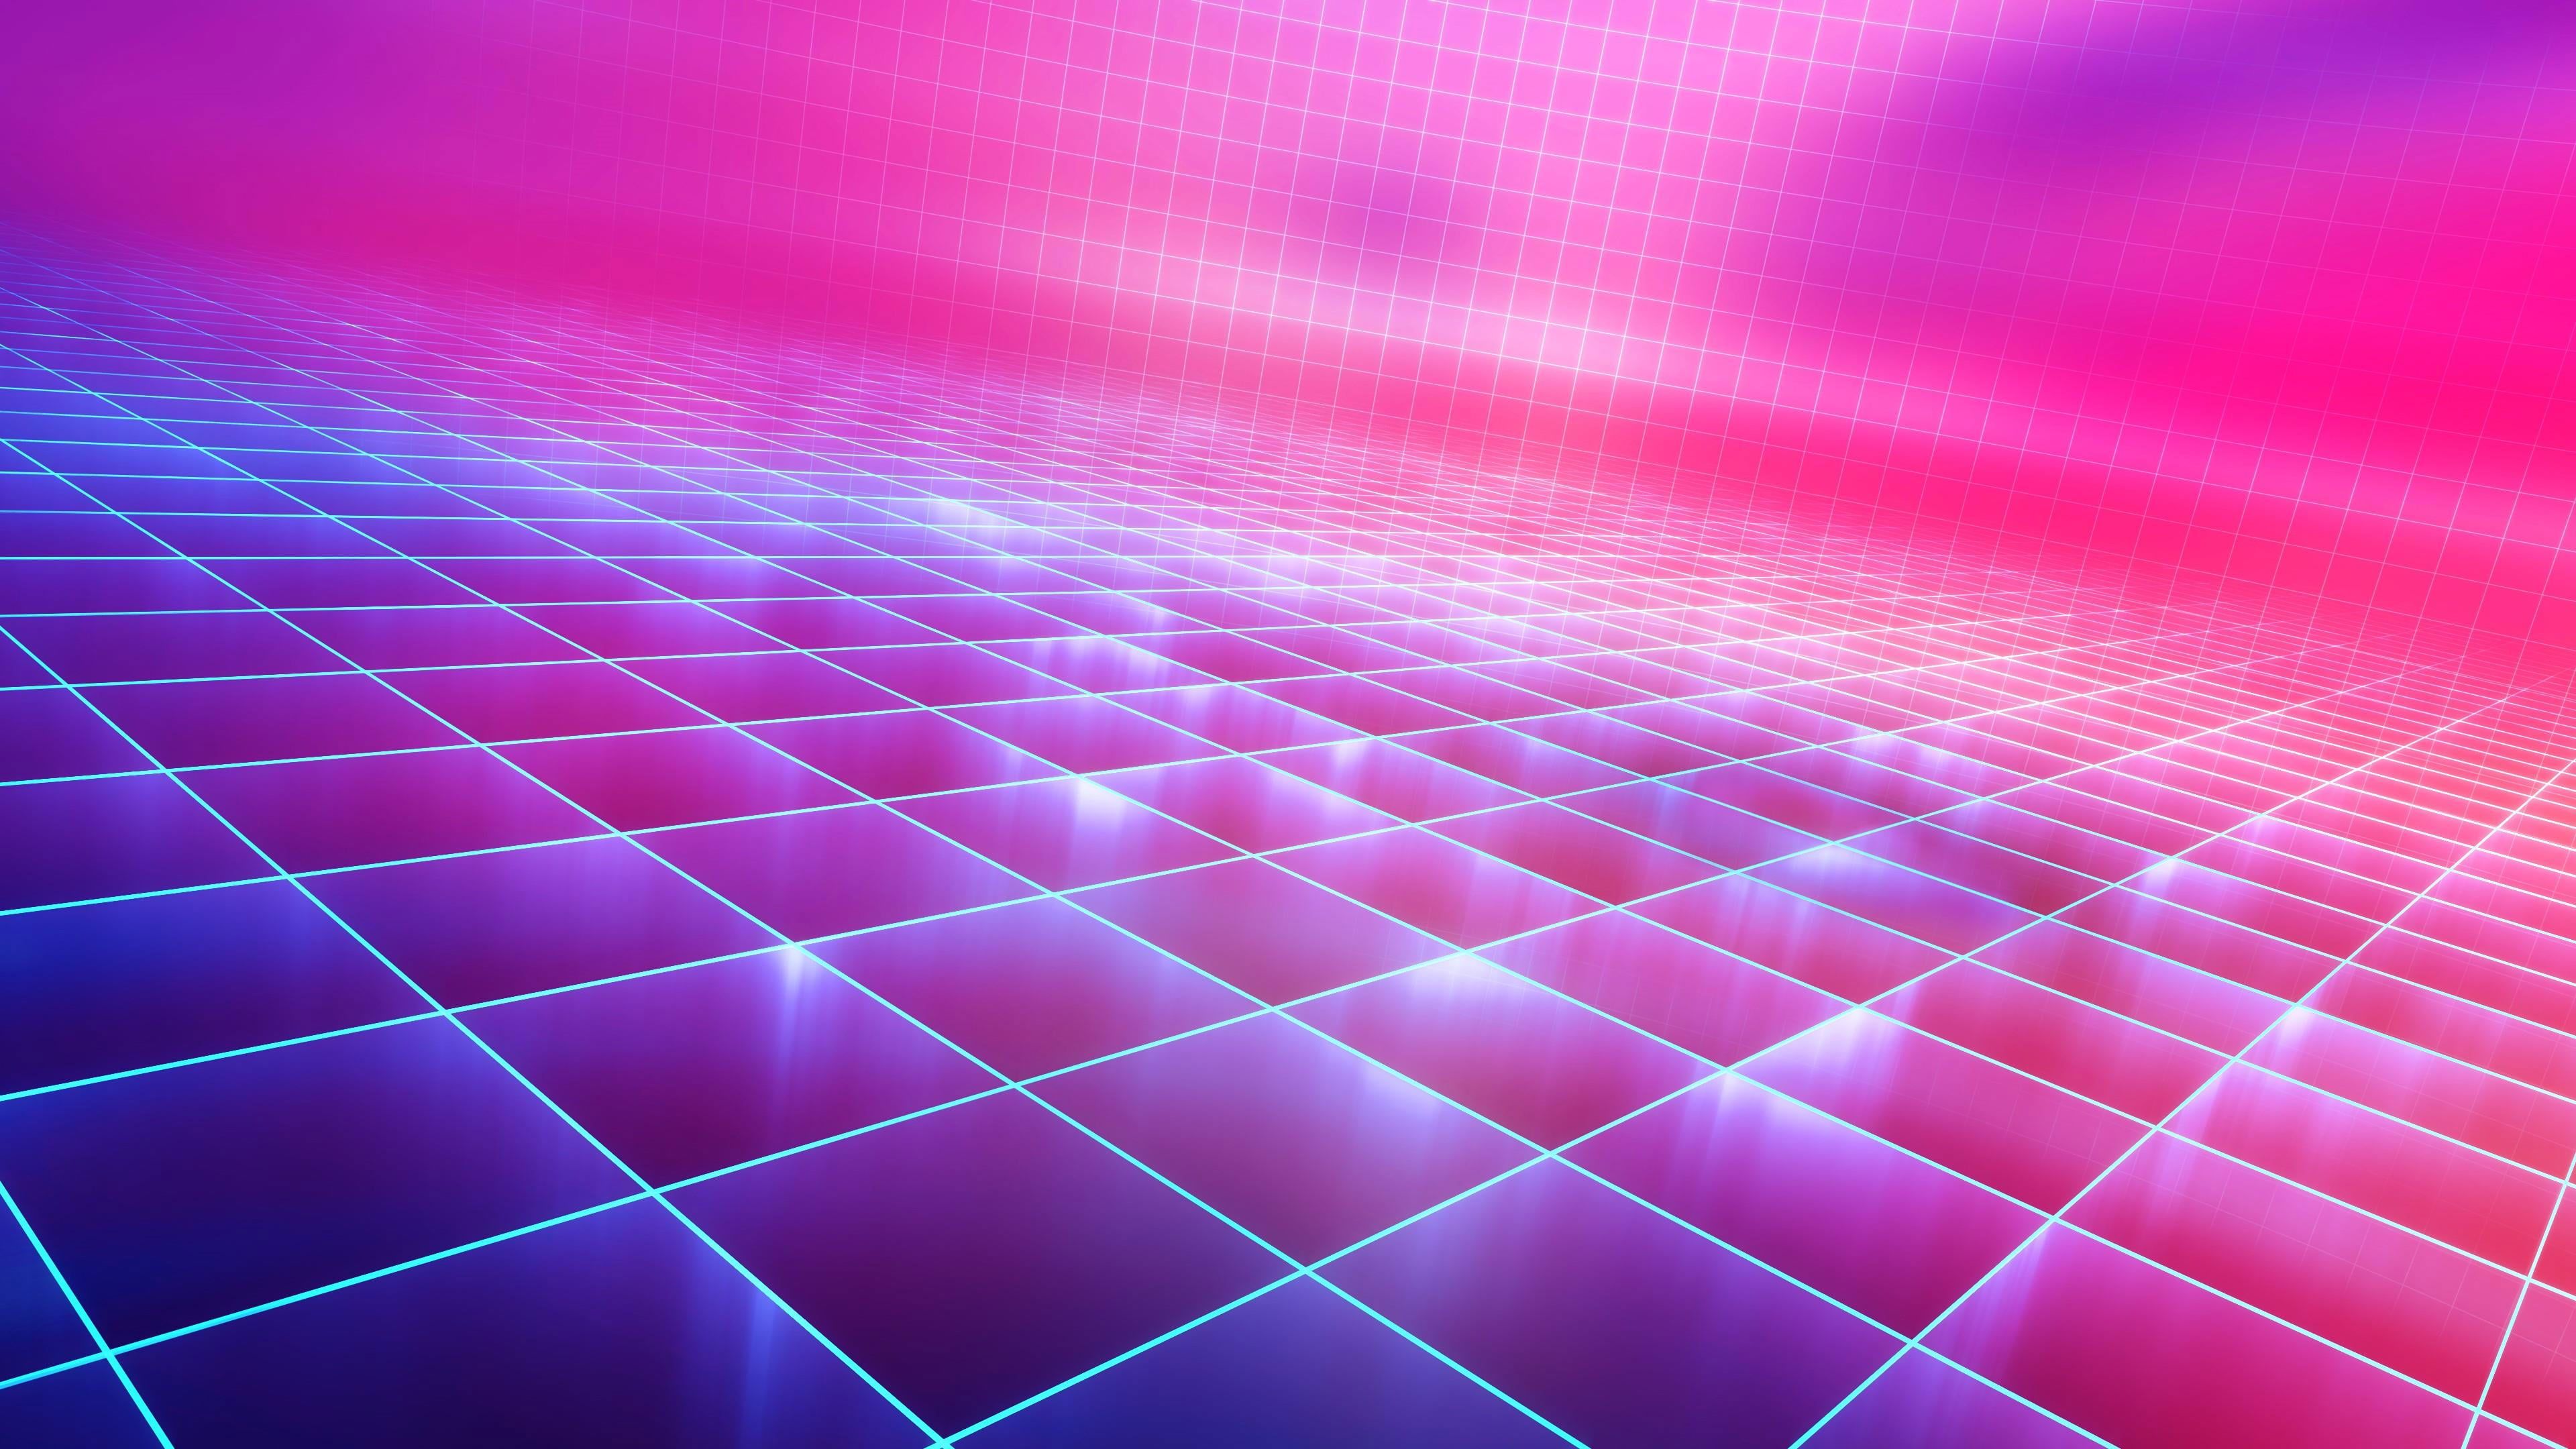 A retro 80s style background with neon colors - Magenta